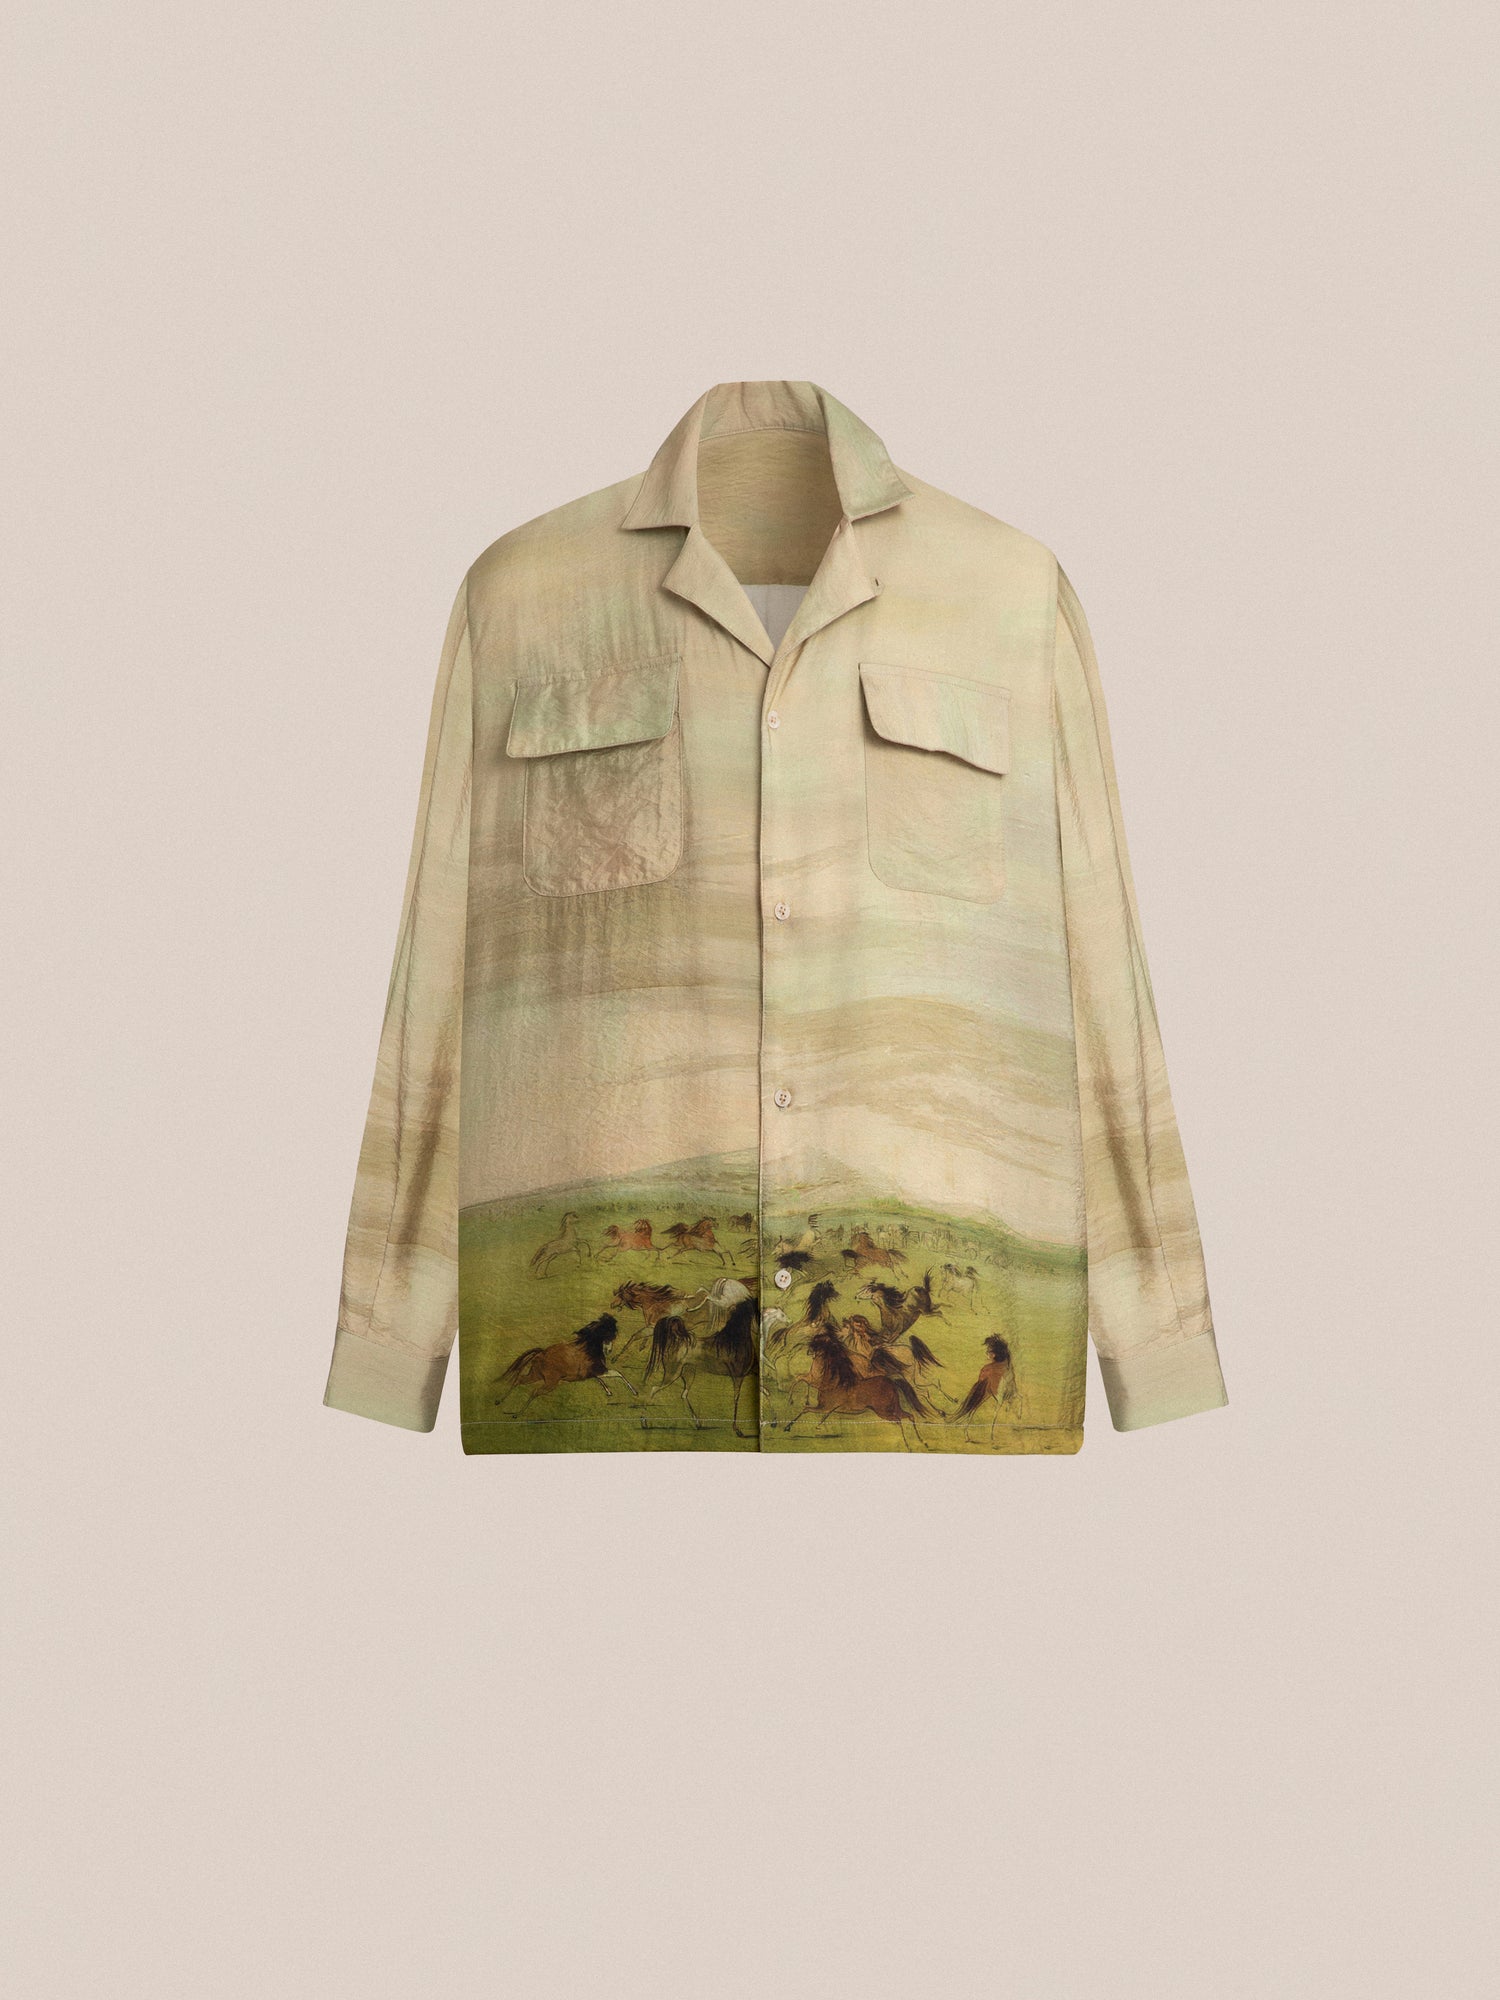 A Grasslands Long Sleeve Camp Shirt with an image of horses on it, designed with Phulkari motifs by Found.